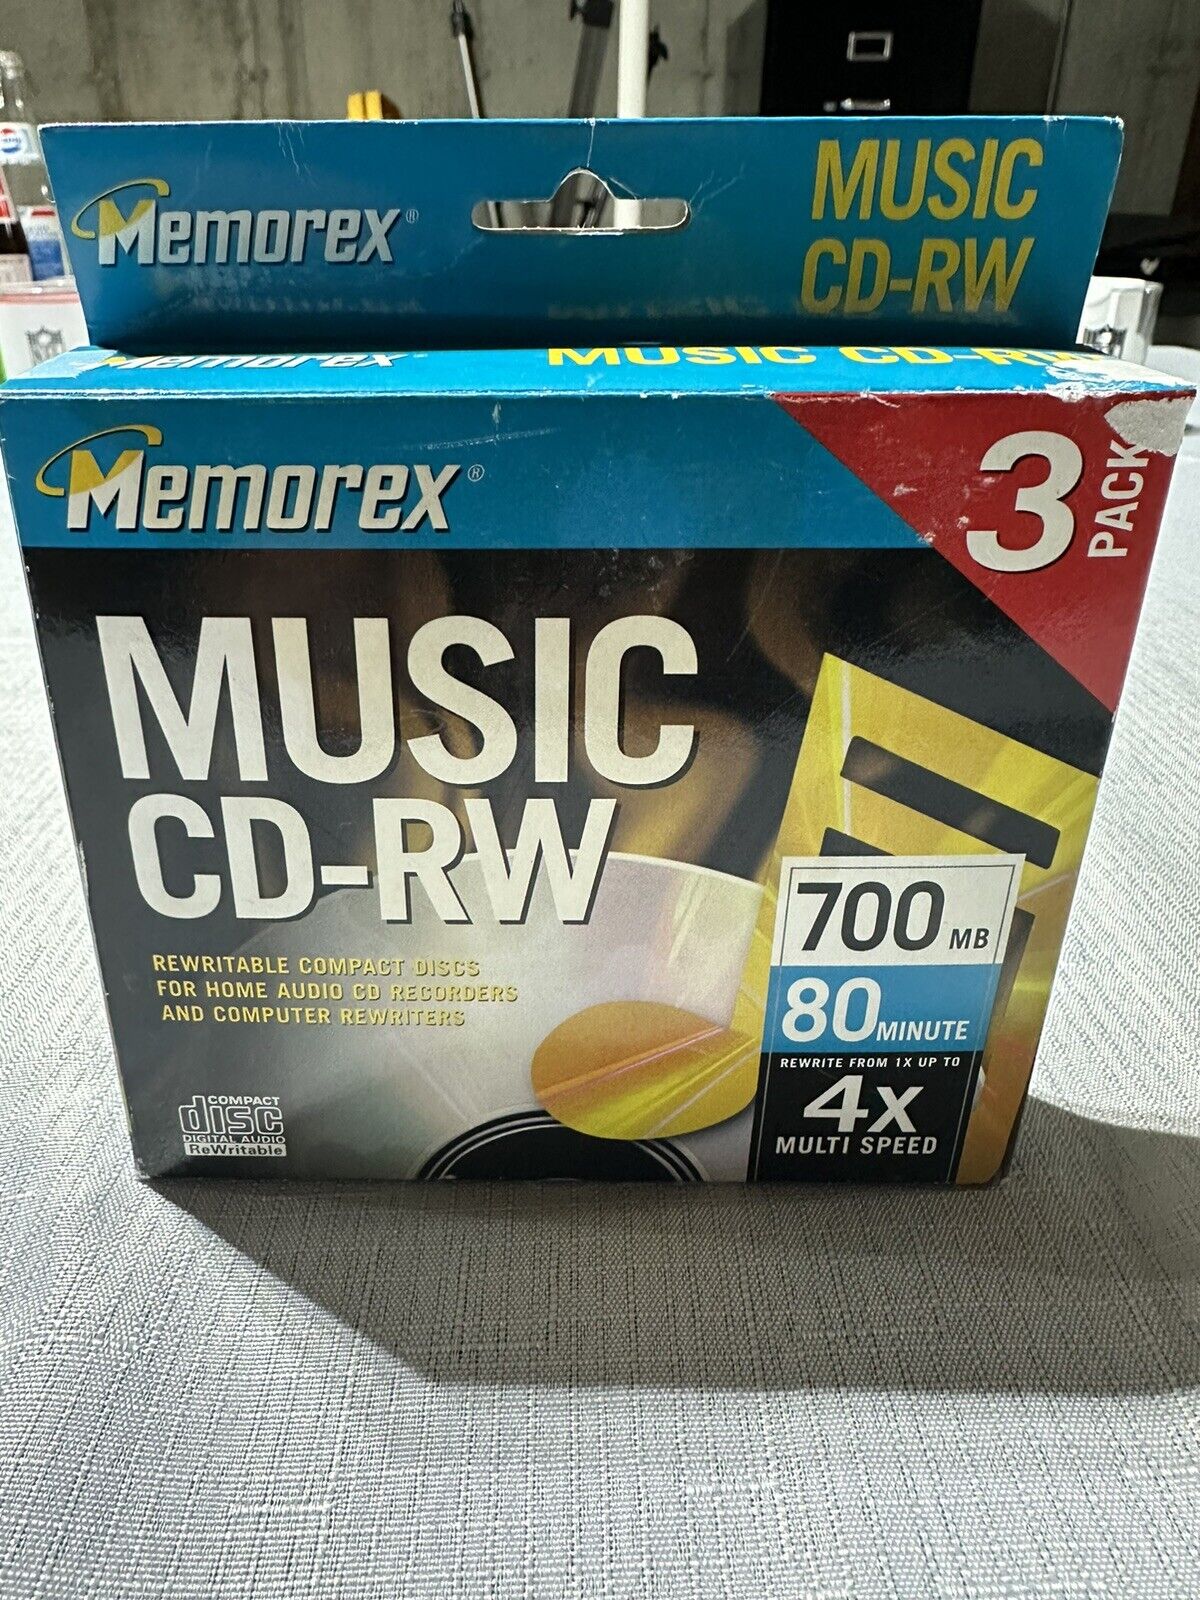 Memorex Music CD-RW/3 Pack-Rewritable Compact Discs-700MB,80 Min.,From 1x-4x MS